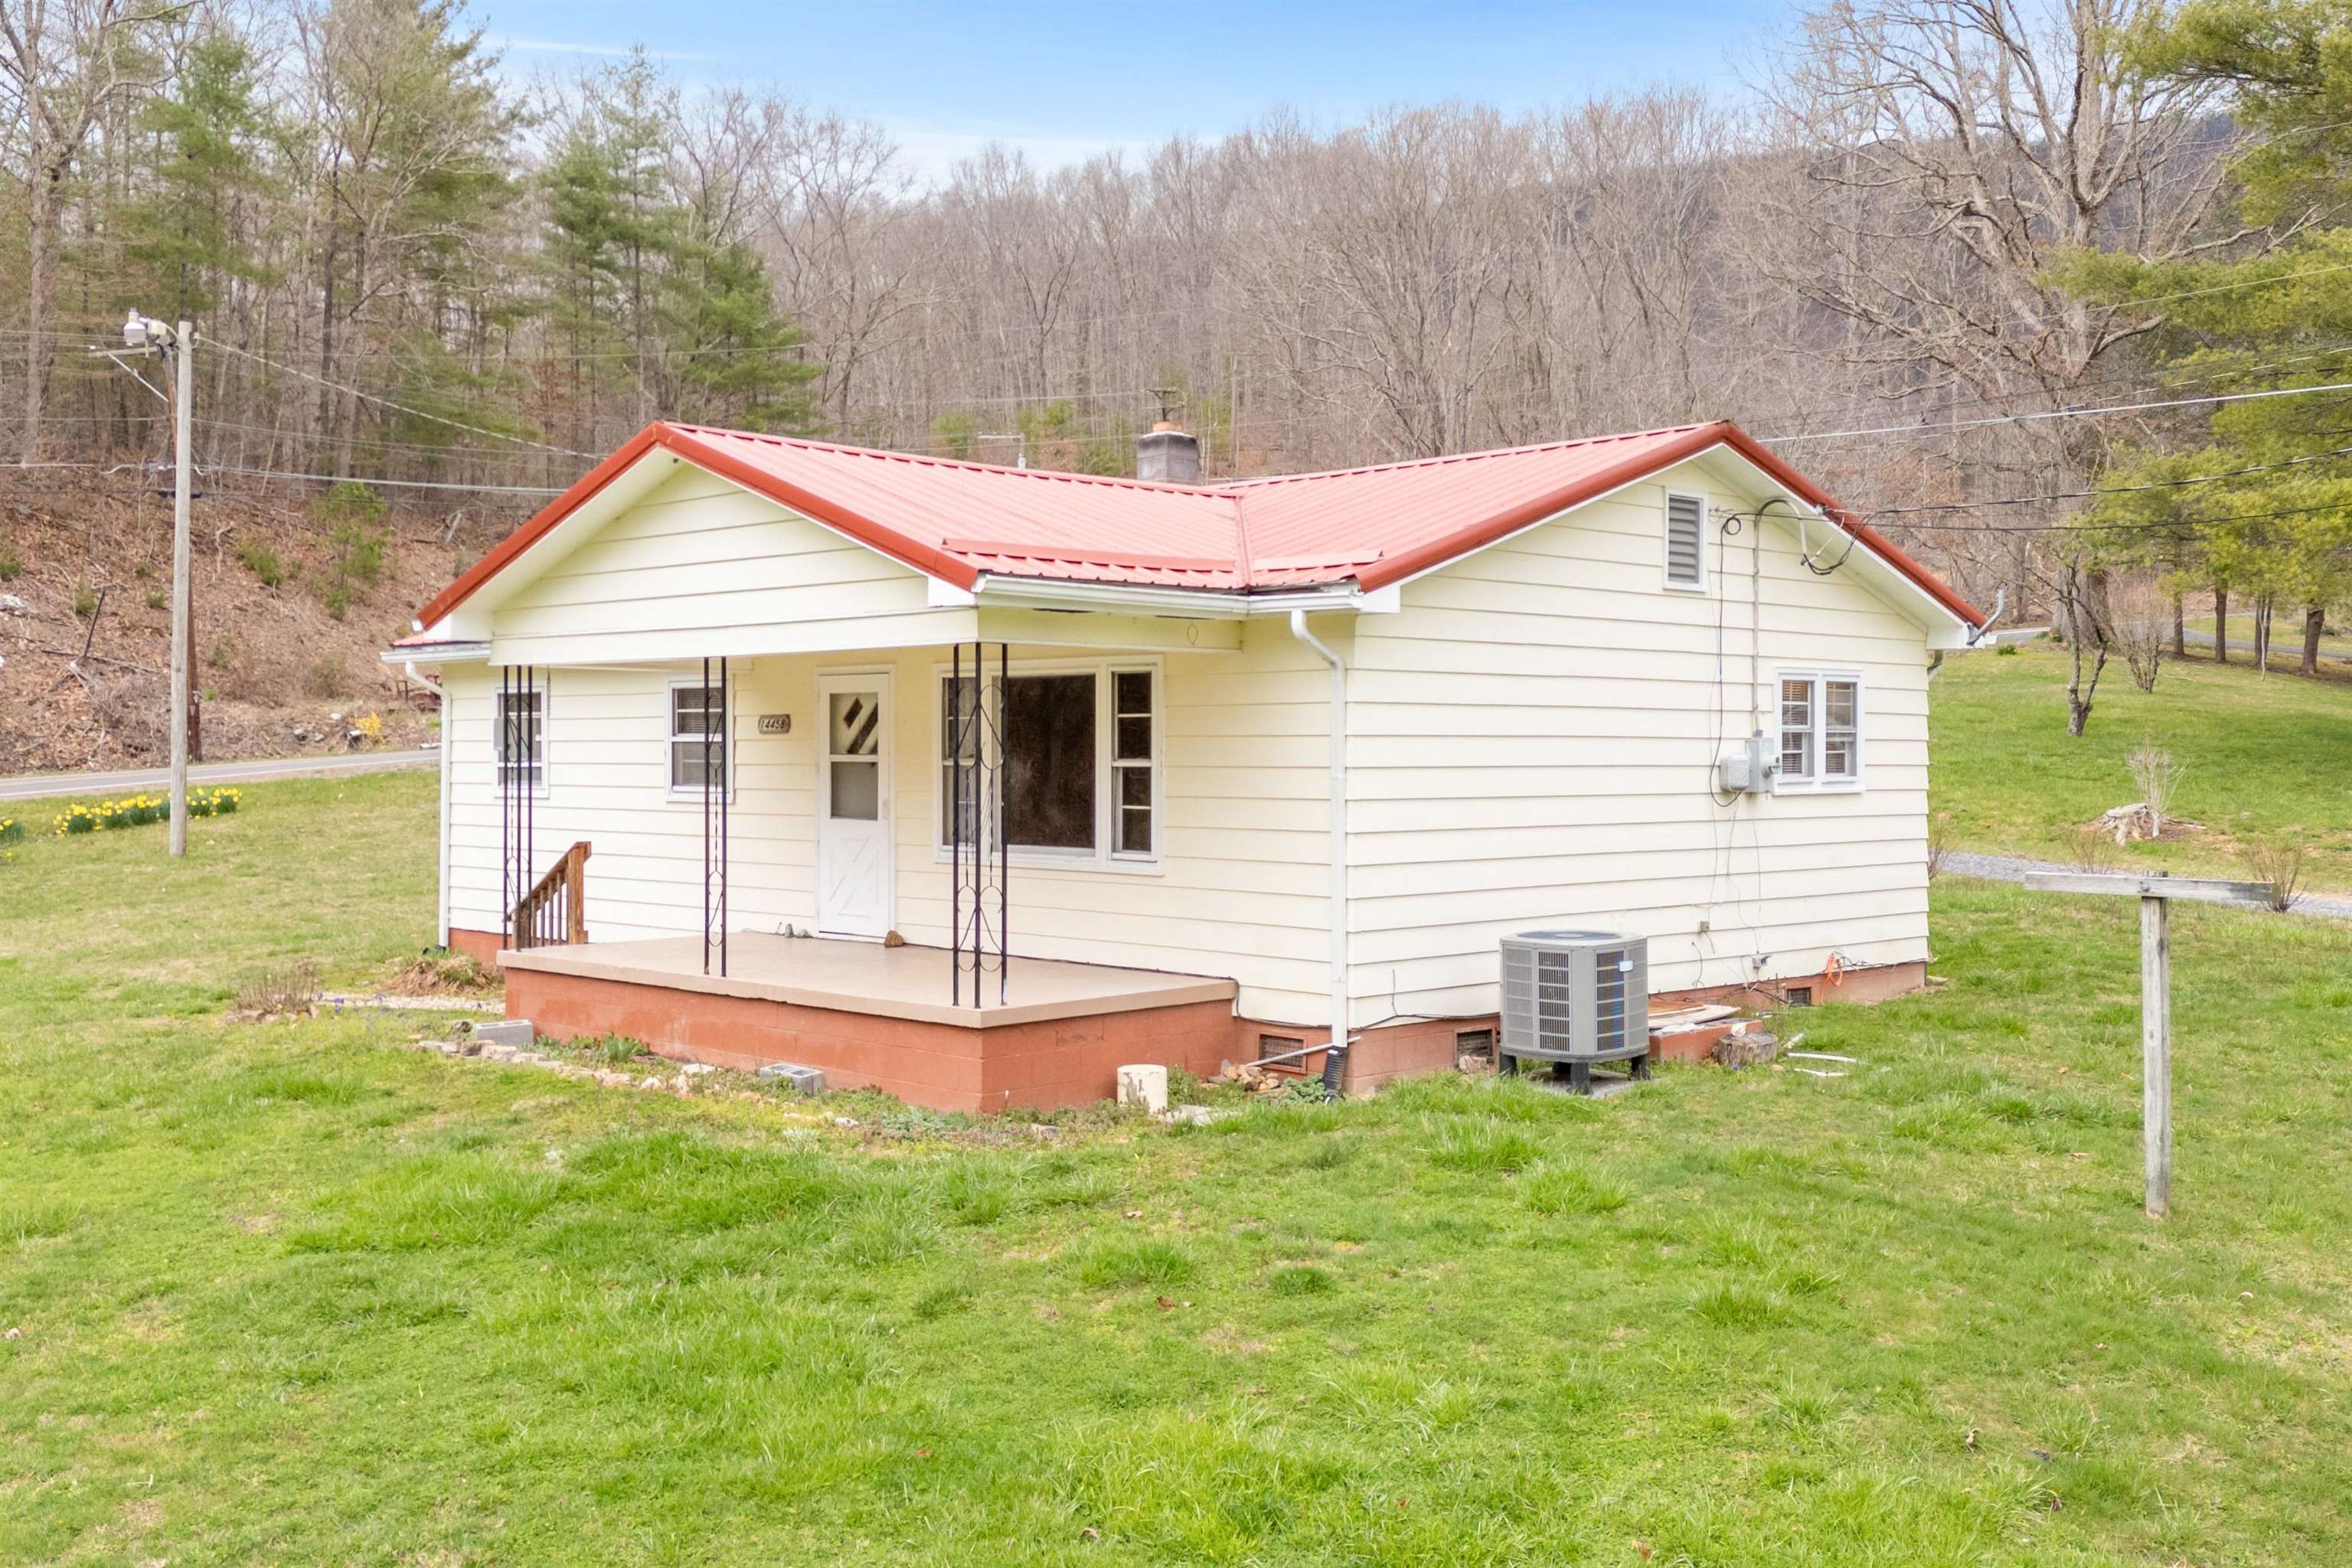 3 BR 1 BA ranch home on just under a half acre in Rocky Gap, VA. Located less than a half mile from I-77 near East River Mountain Tunnel and the WV/VA state line. Recently surveyed and recorded. Public water and a private septic system. Heat pump that is only about 6.5 years old, an approx. 3 year old metal roof, large covered front porch with a beautiful mountain view, oven, refrigerator and small outbuilding included, and hardwood flooring through most of the home. Existing flue in the kitchen/dining area. Great starter home or investment opportunity. Located on US RT 52, which is state maintained. High school and post office are within about a mile or so. Great location and popular price range for a lot of potential buyers!